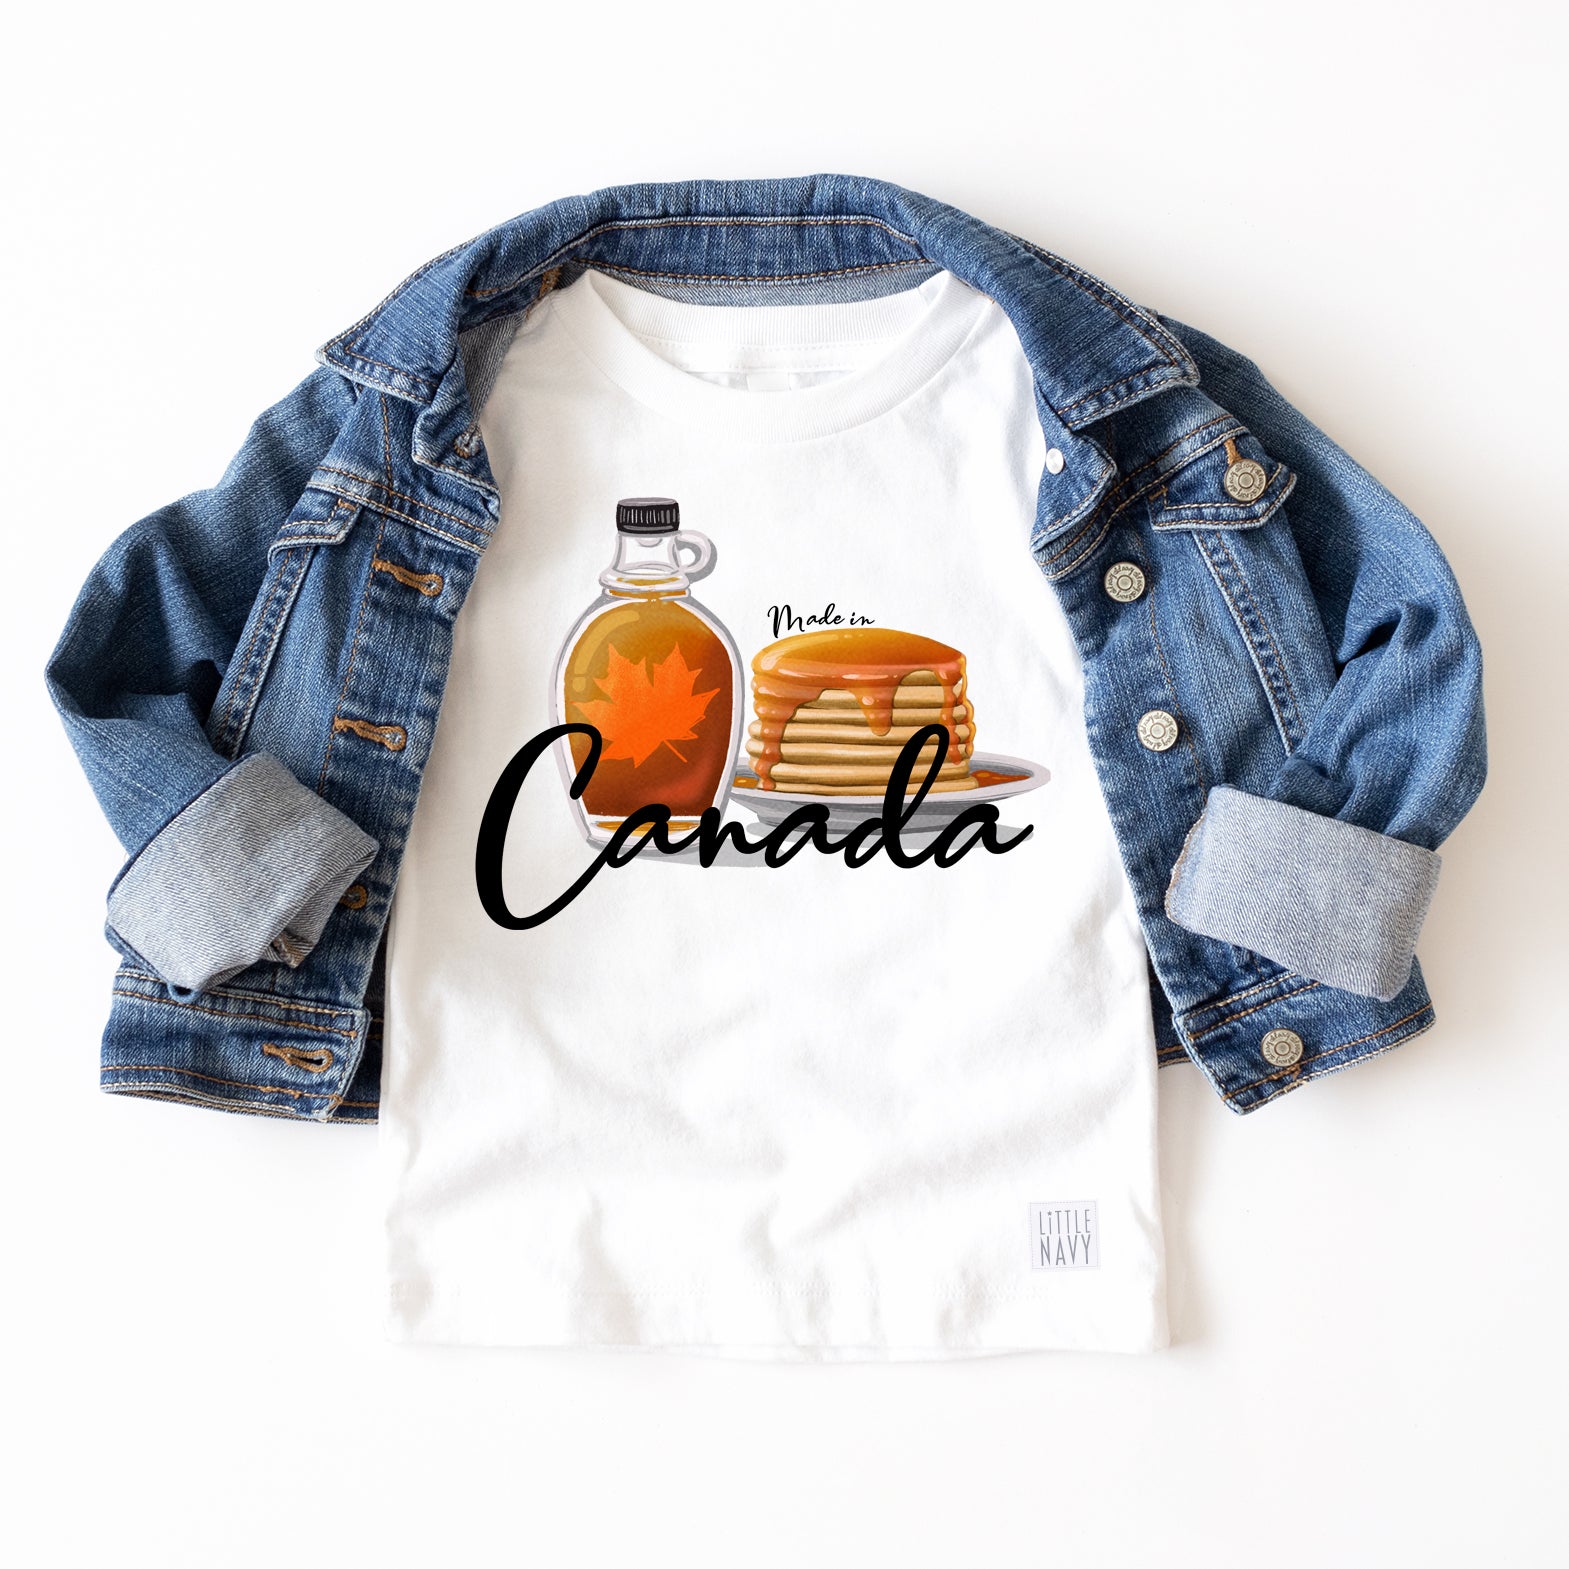 Made in Canada T-Shirt - Maple Syrup